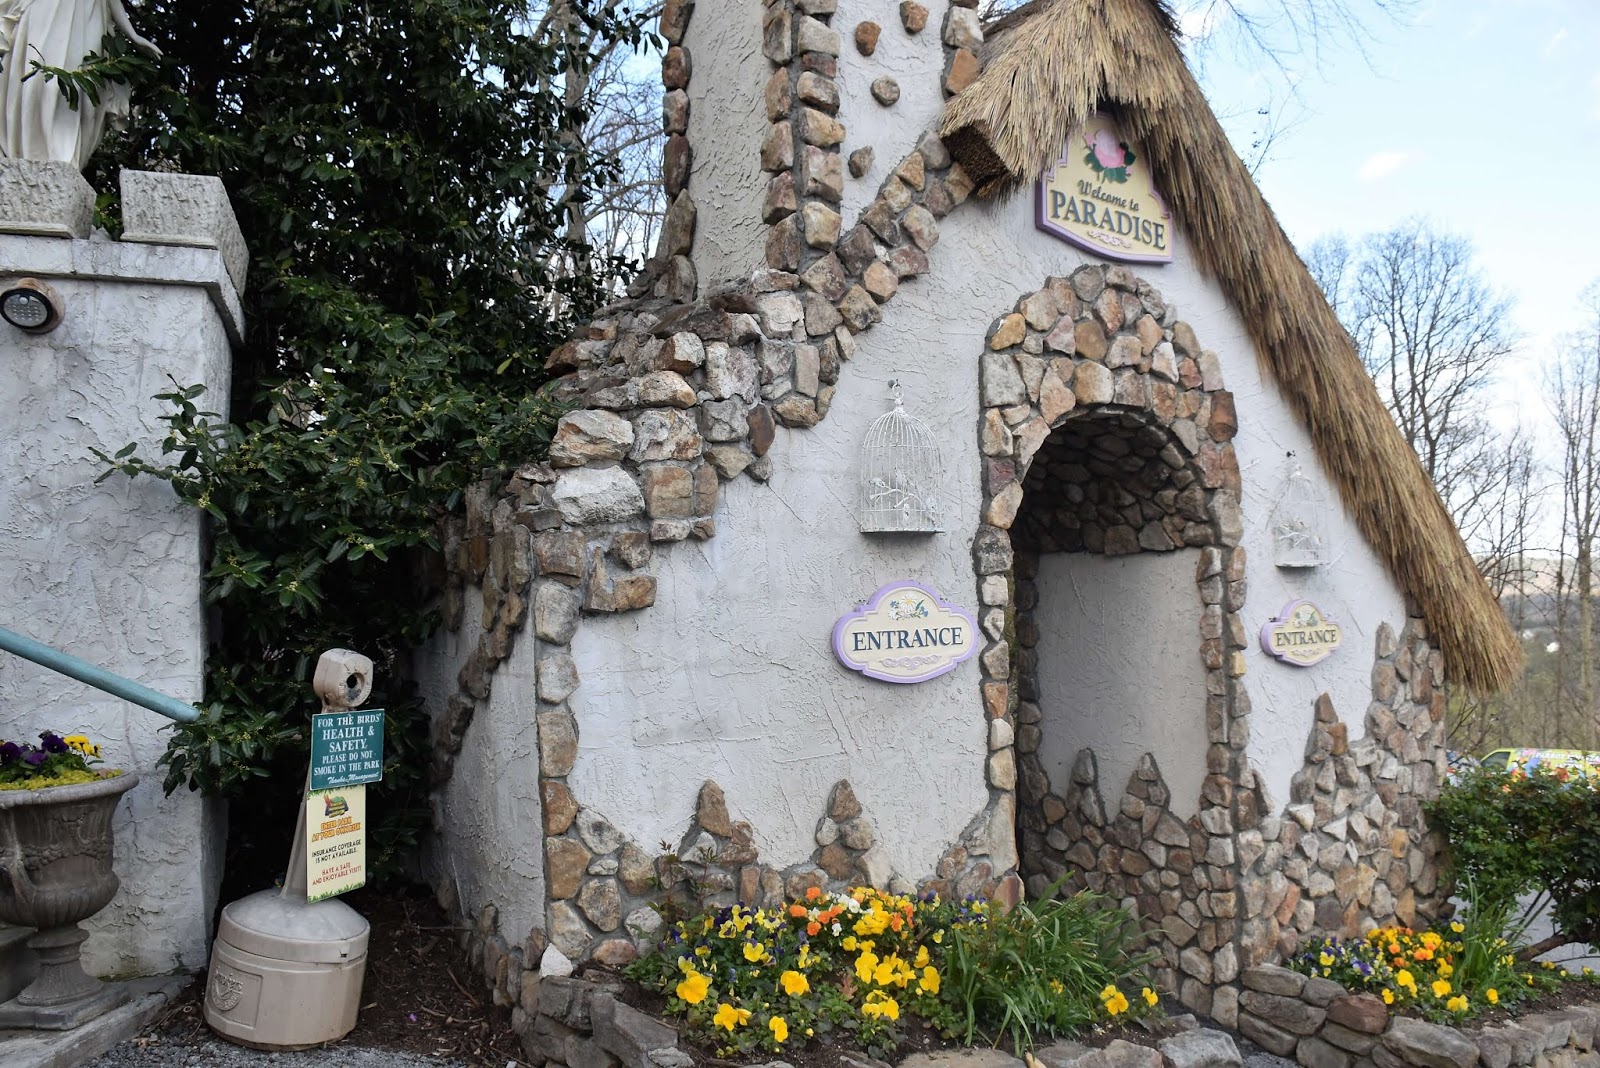 Enter into Paradise at Parrot Mountain in Pigeon Forge